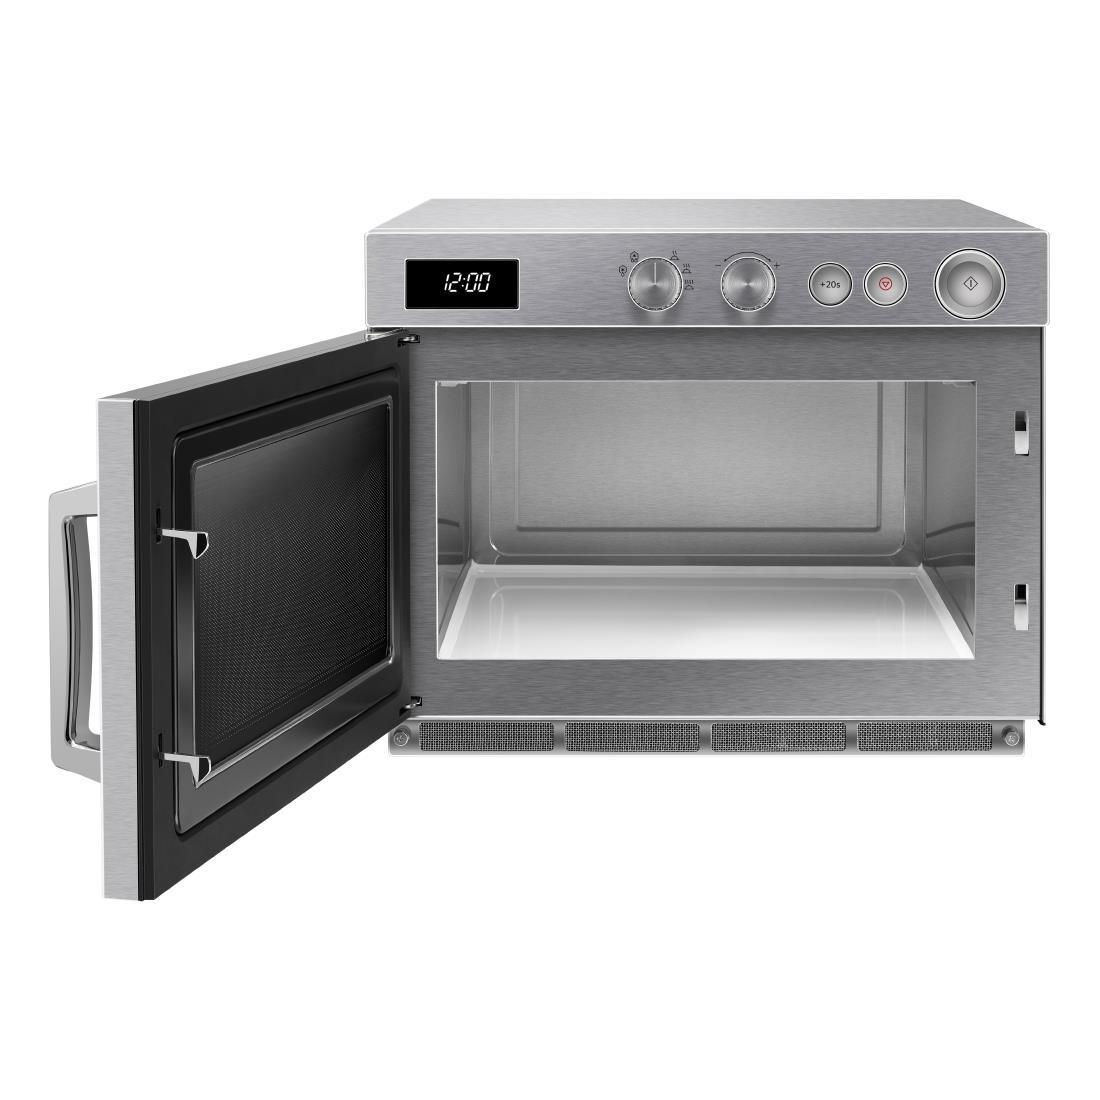 Samsung Commercial Microwave Manual 26Ltr 1850W - FS315  - 3